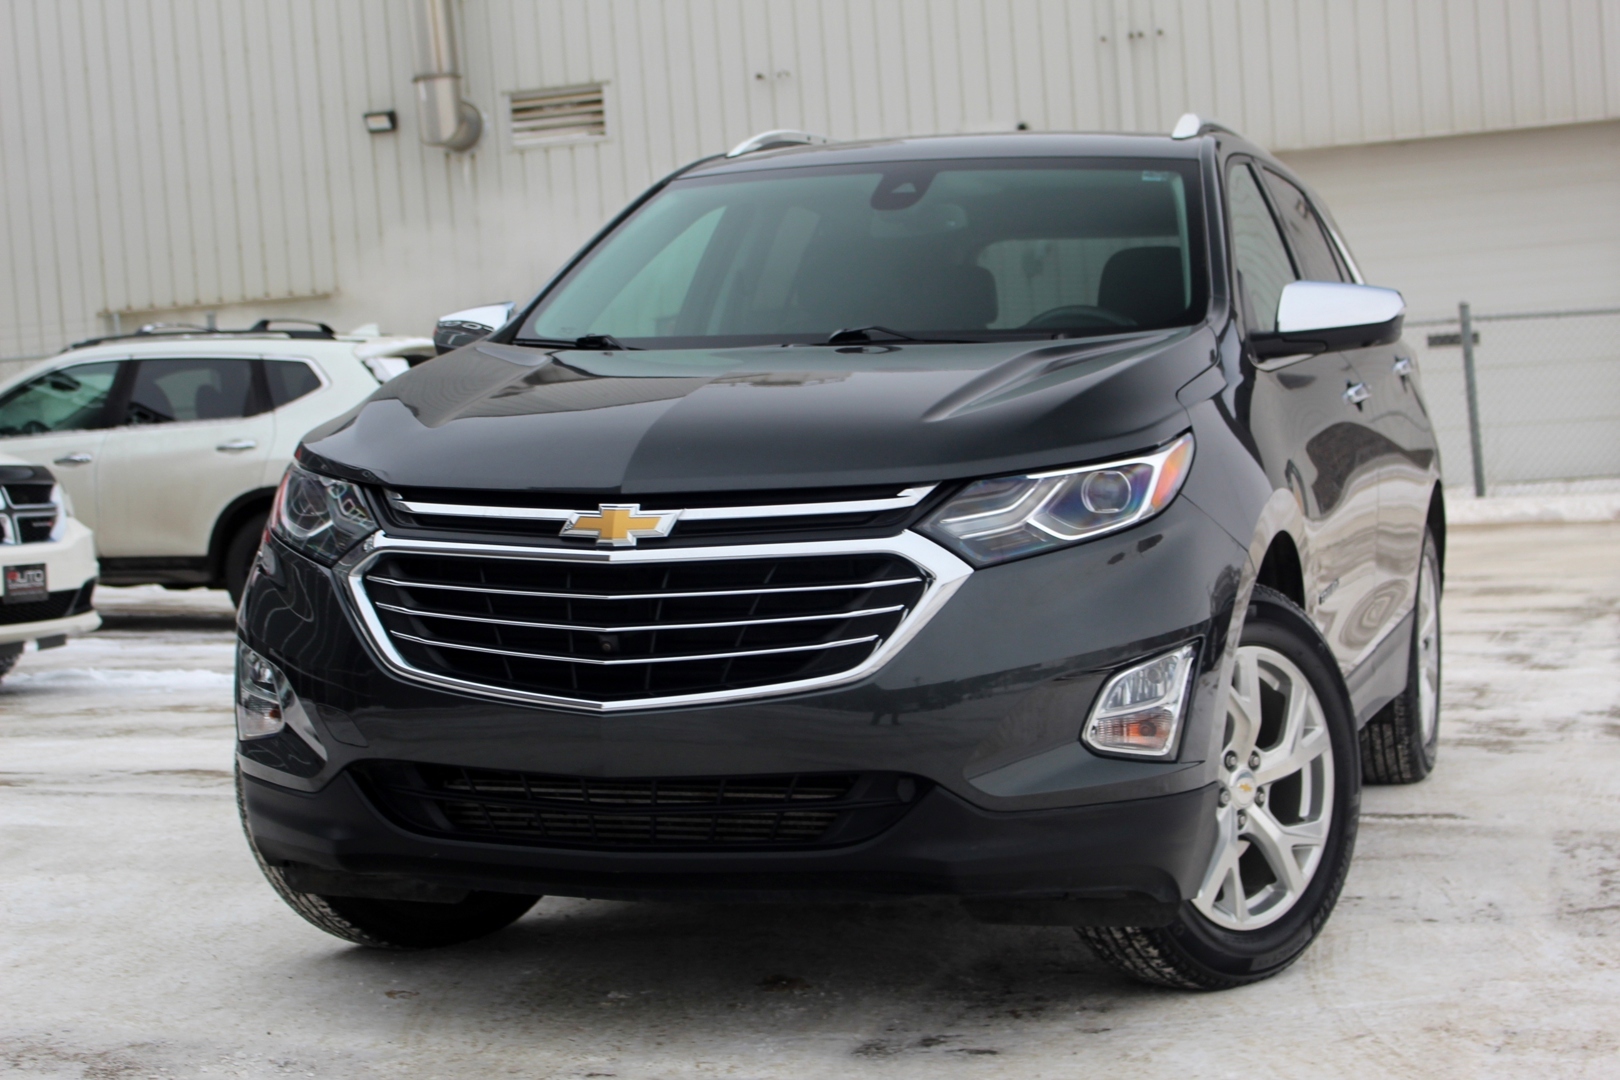 2019 Chevrolet Equinox Premier - AWD - LEATHER - HEATED & COOLED SEATS